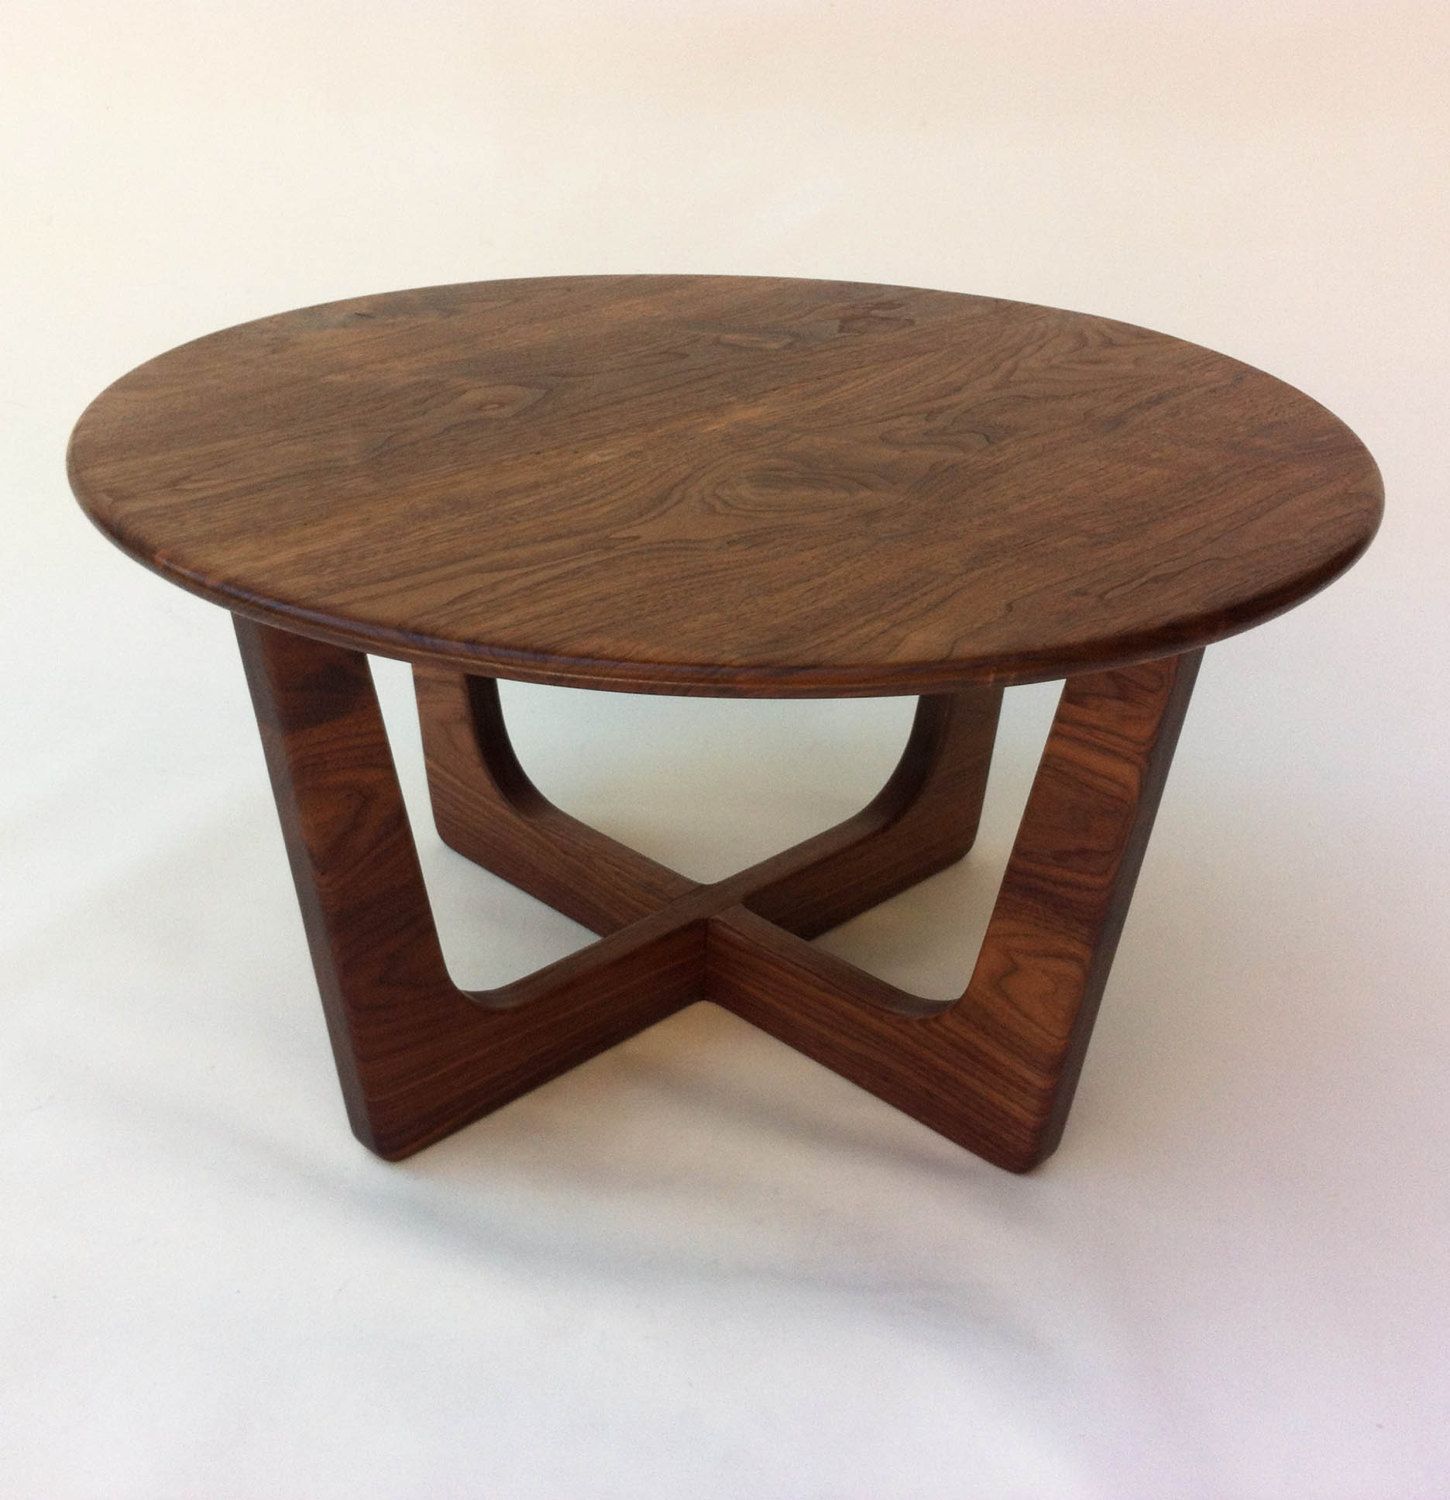 Solid Walnut Round Mid Century Modern Coffee Table With Regard To Wooden Mid Century Coffee Tables (View 3 of 20)